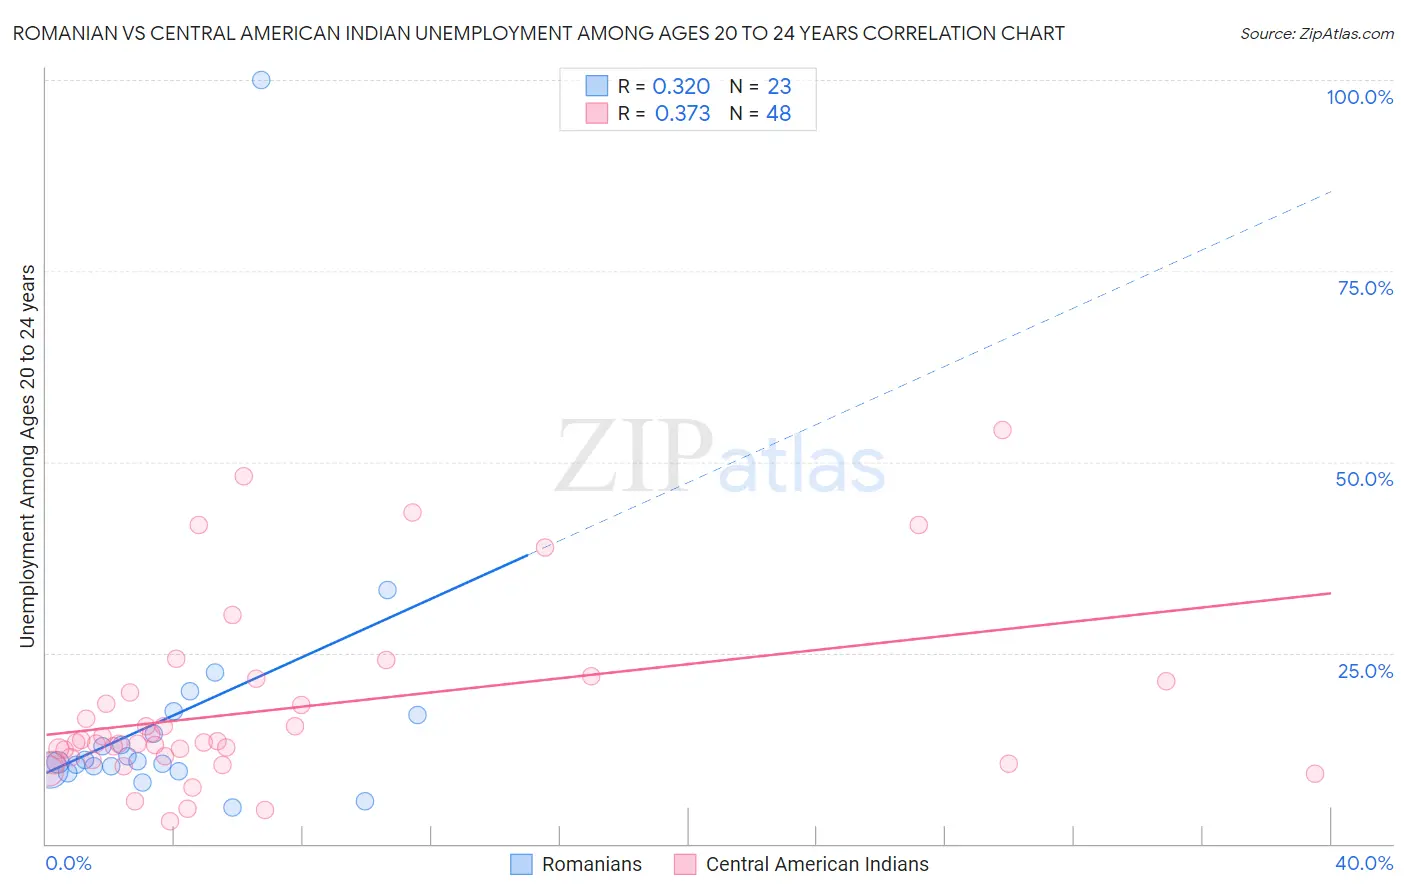 Romanian vs Central American Indian Unemployment Among Ages 20 to 24 years